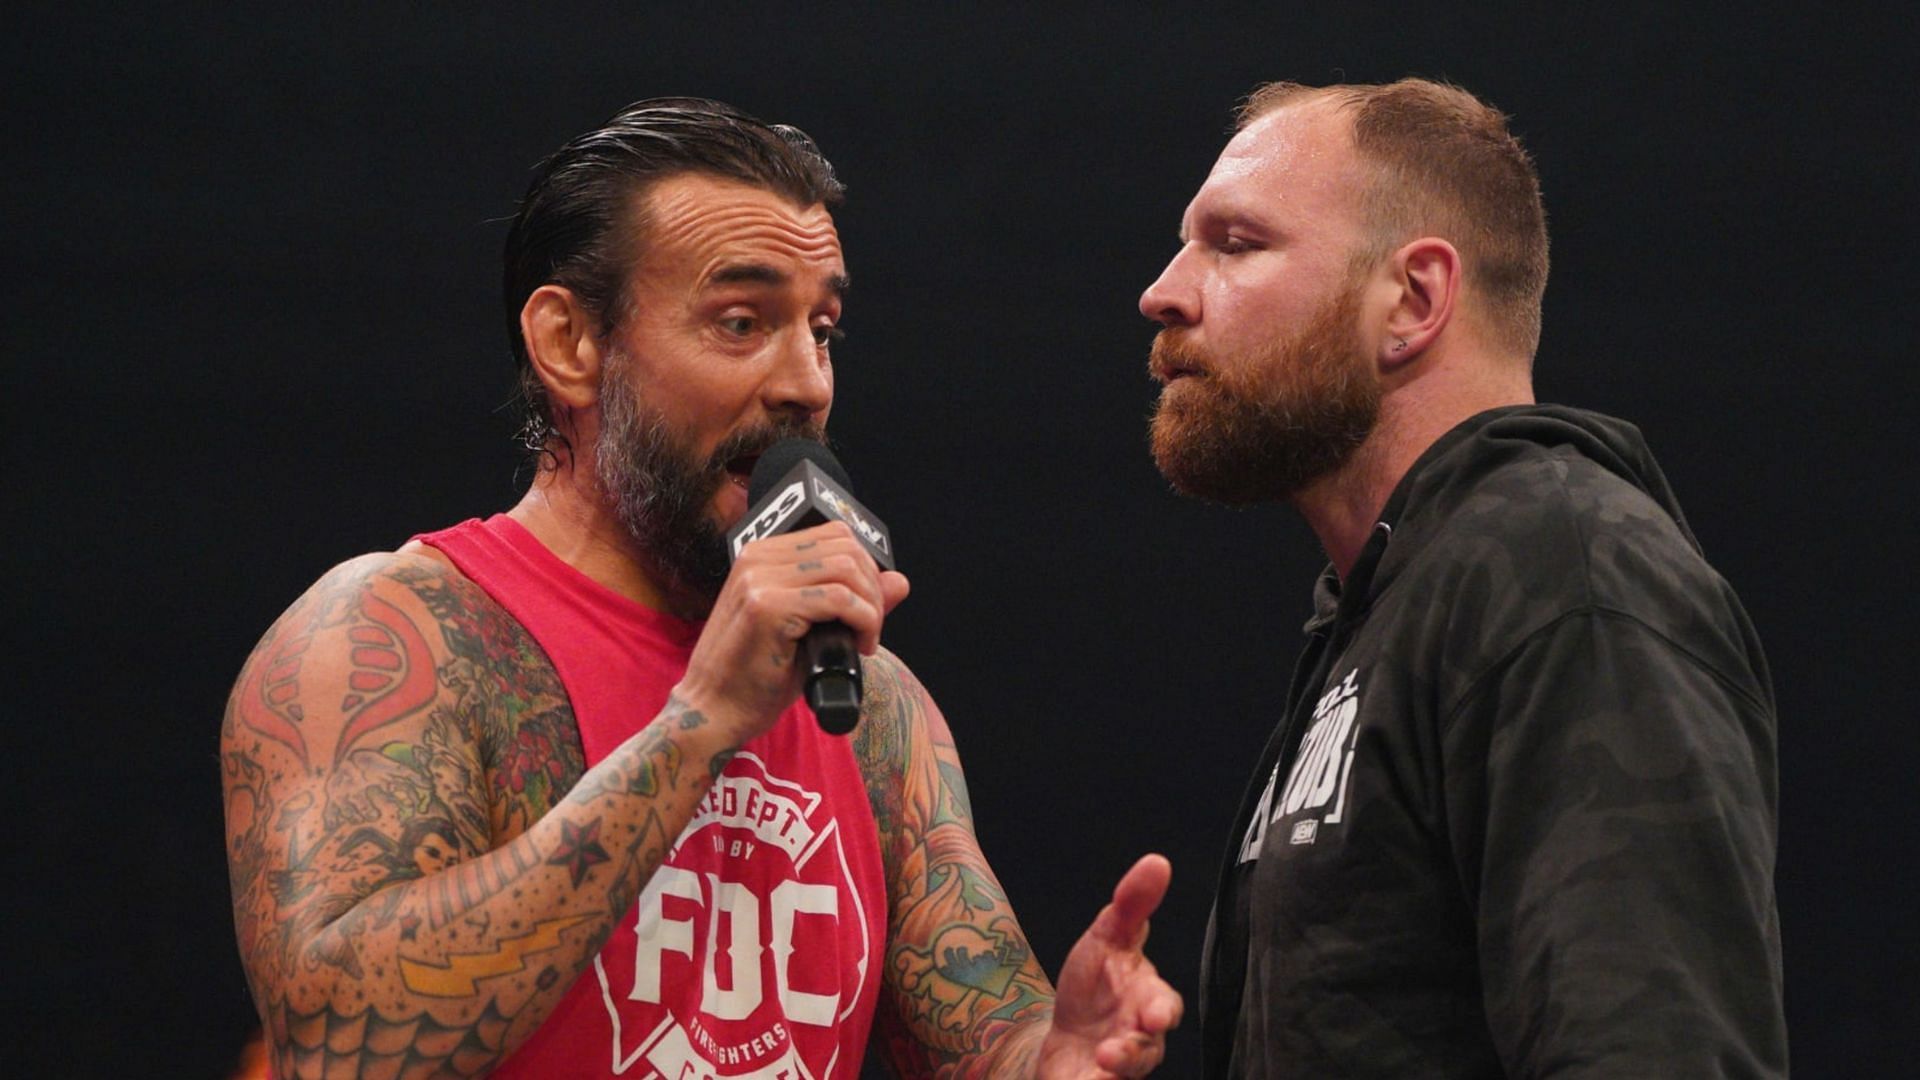 CM Punk and Jon Moxley are both former AEW World Champions.